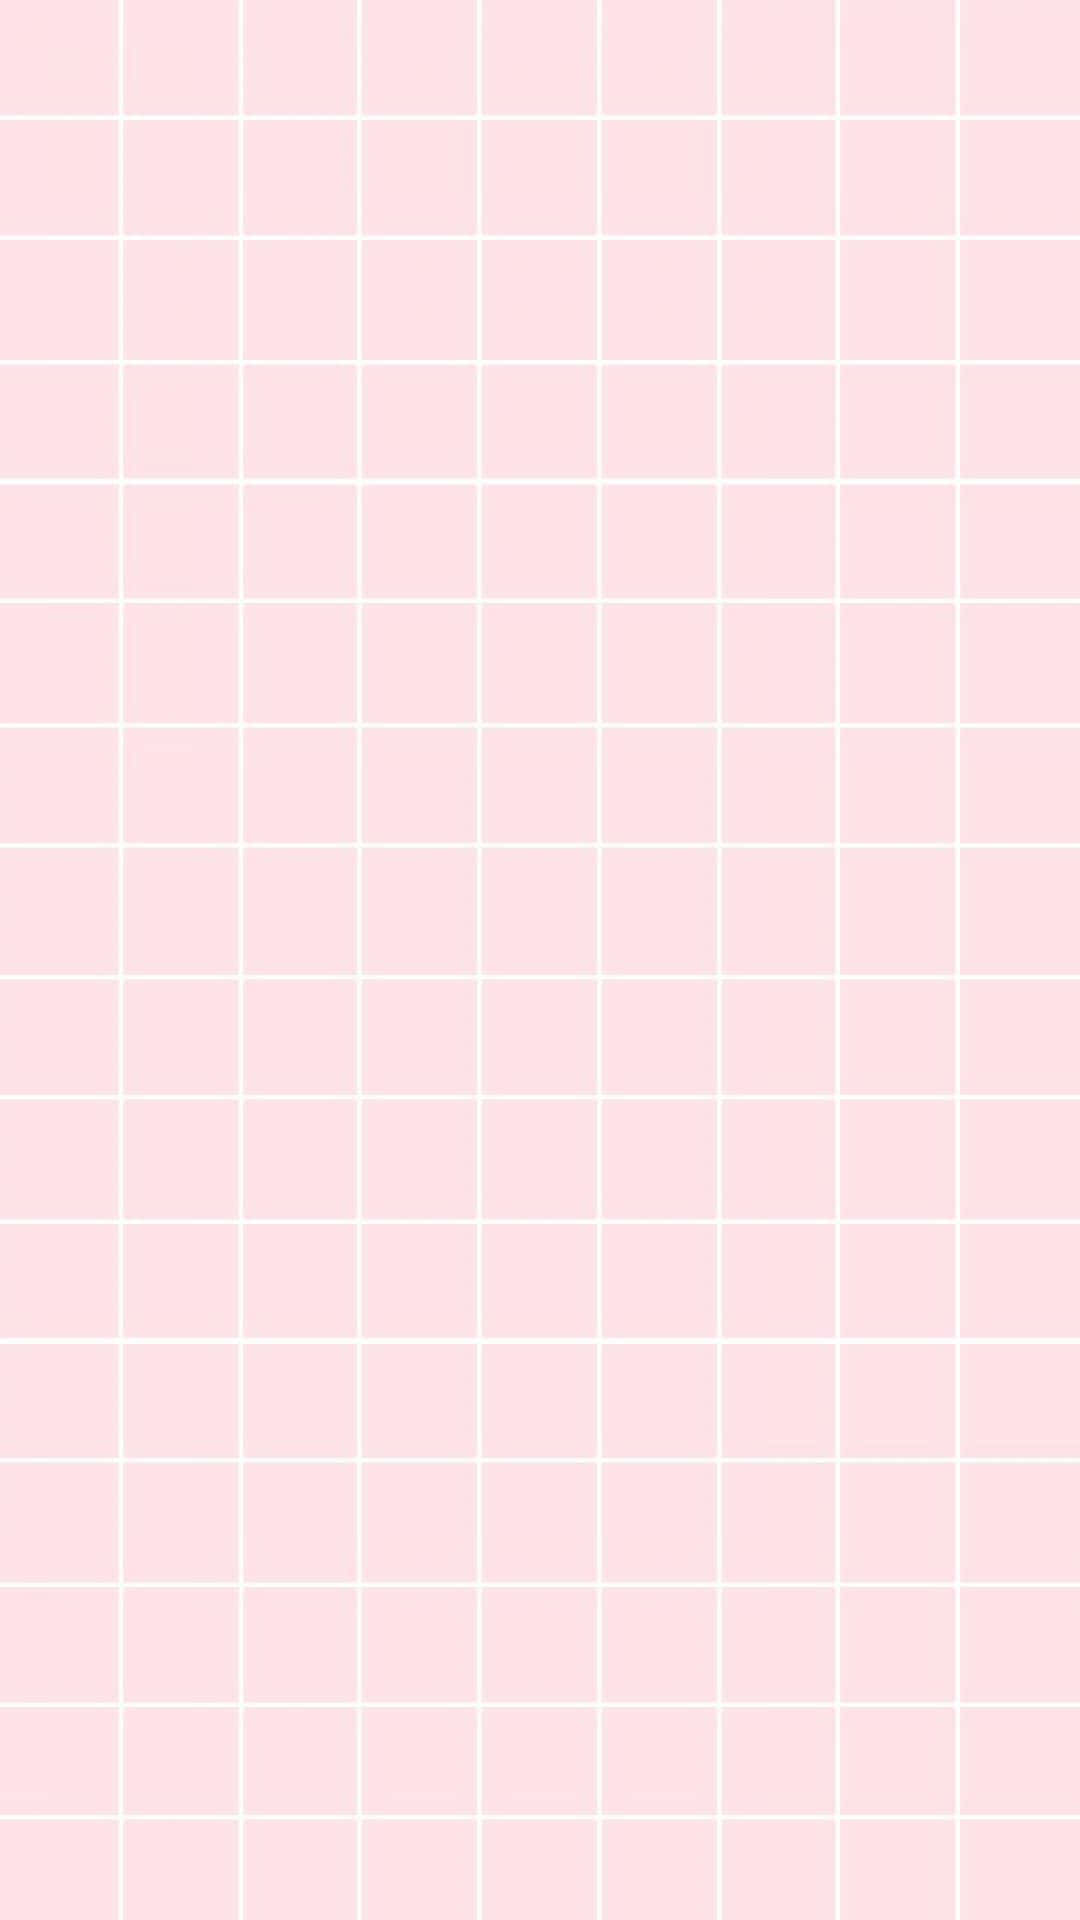 A Pink Grid Wallpaper With White Squares